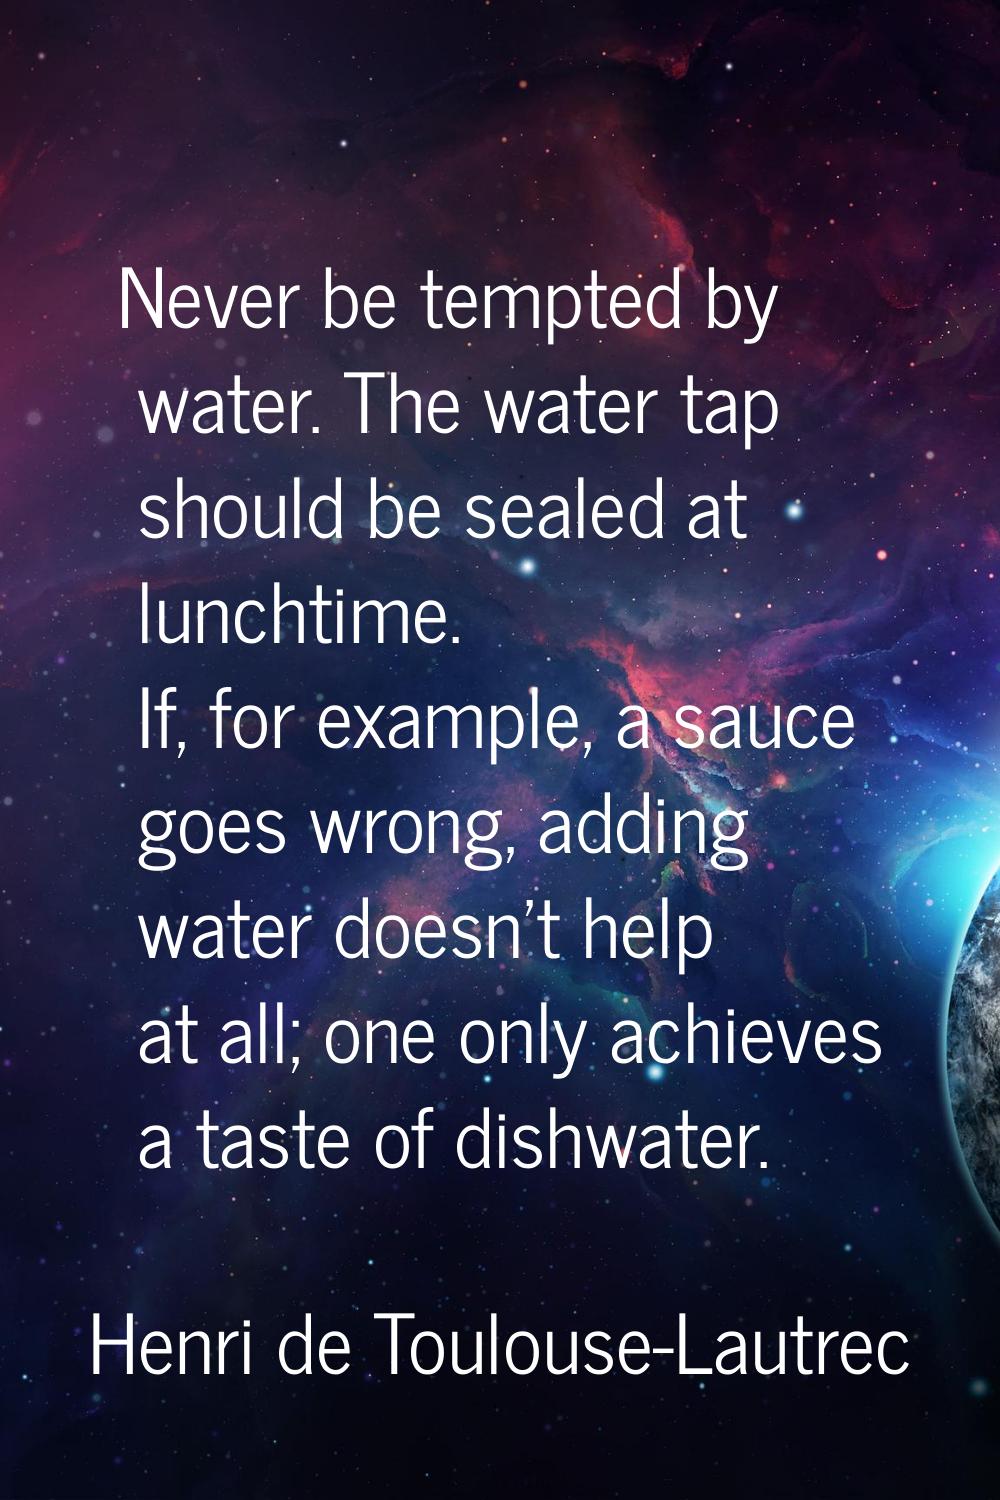 Never be tempted by water. The water tap should be sealed at lunchtime. If, for example, a sauce go